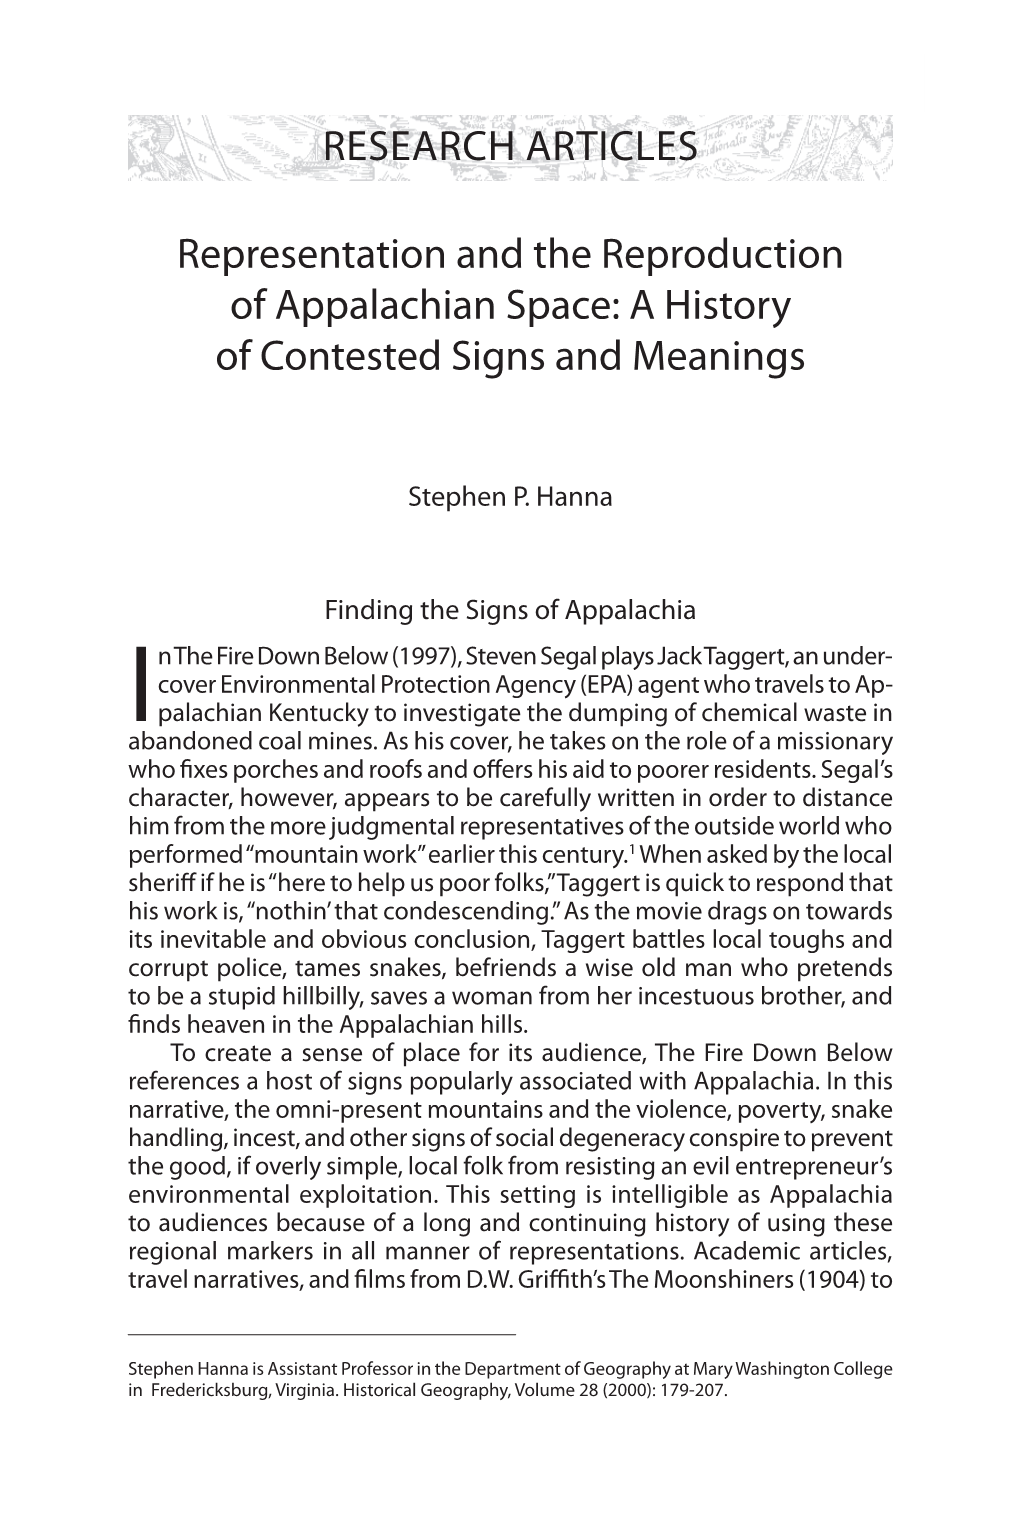 Representation and the Reproduction of Appalachian Space: a History of Contested Signs and Meanings